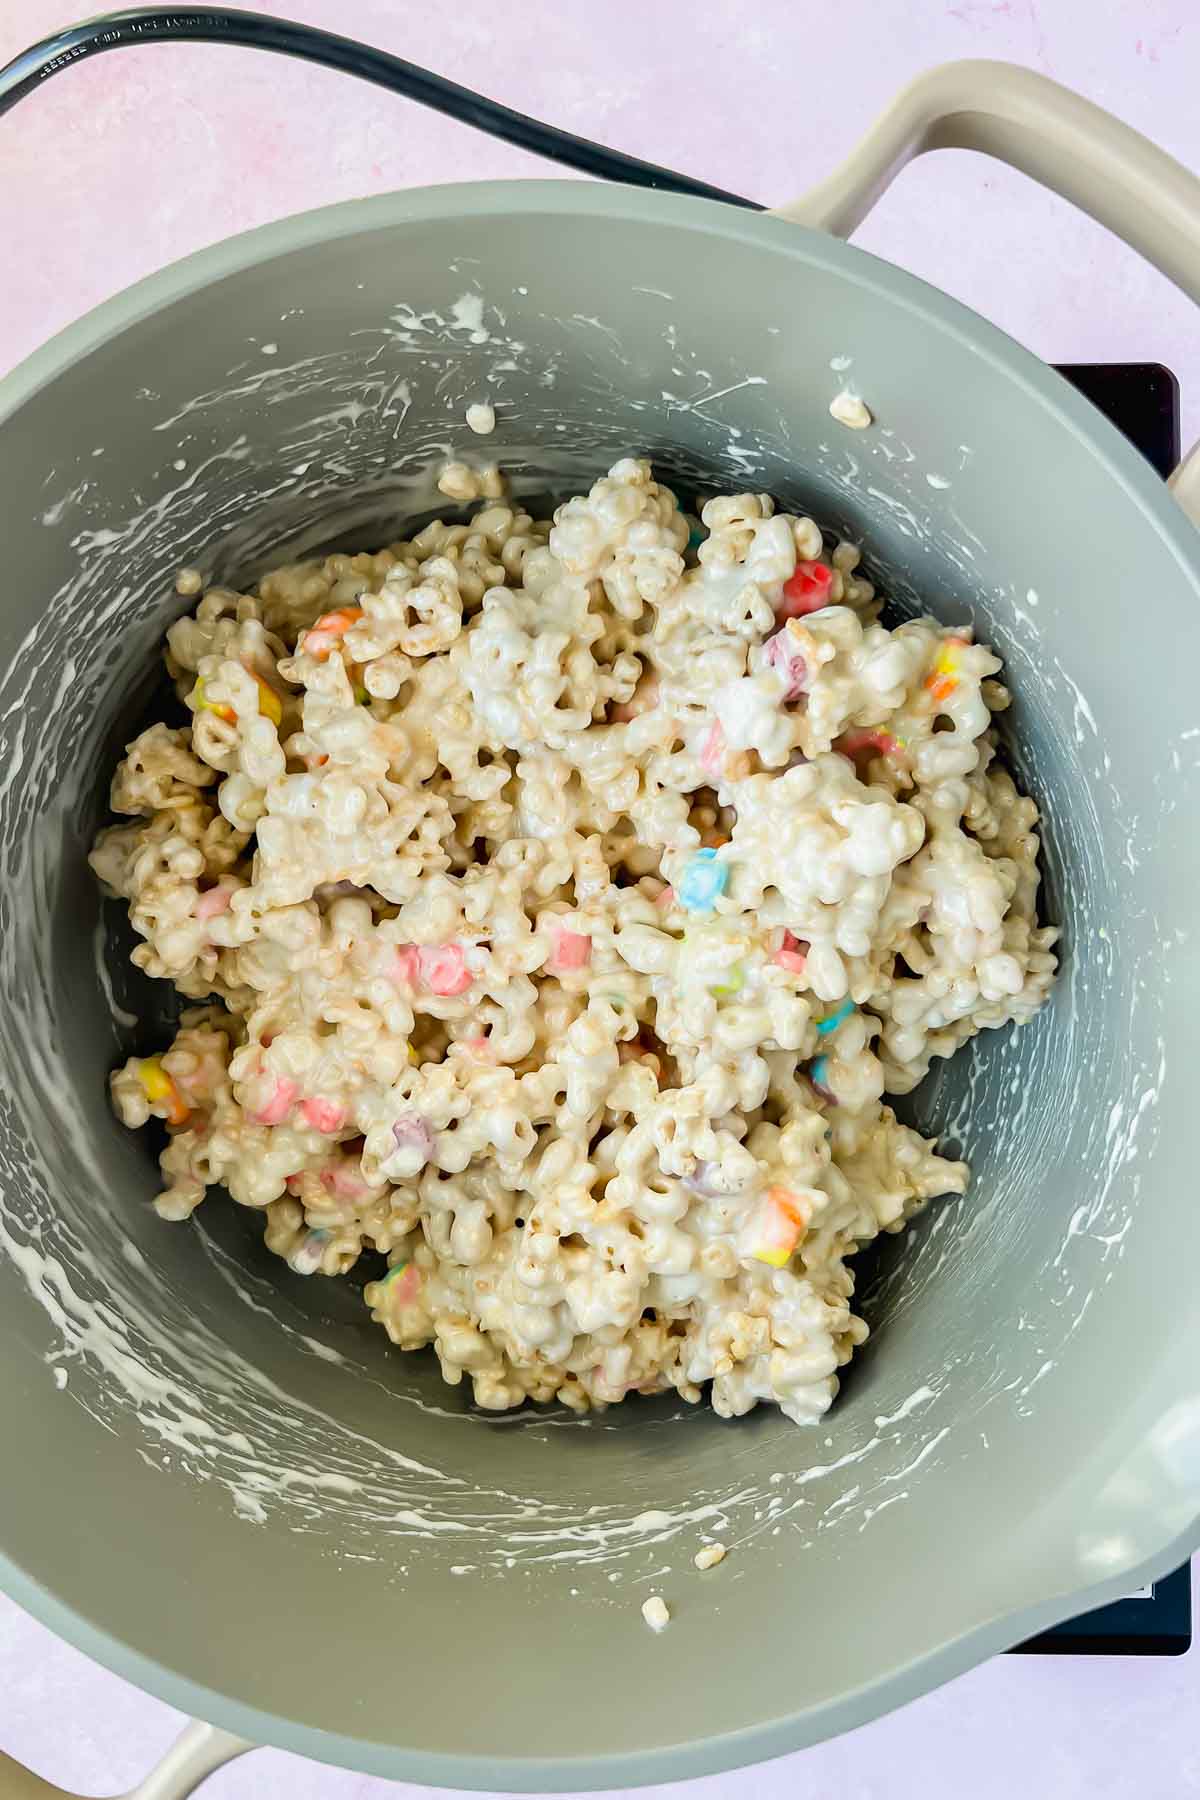 marshmallow covered cereal mixture in gray sauce pot.